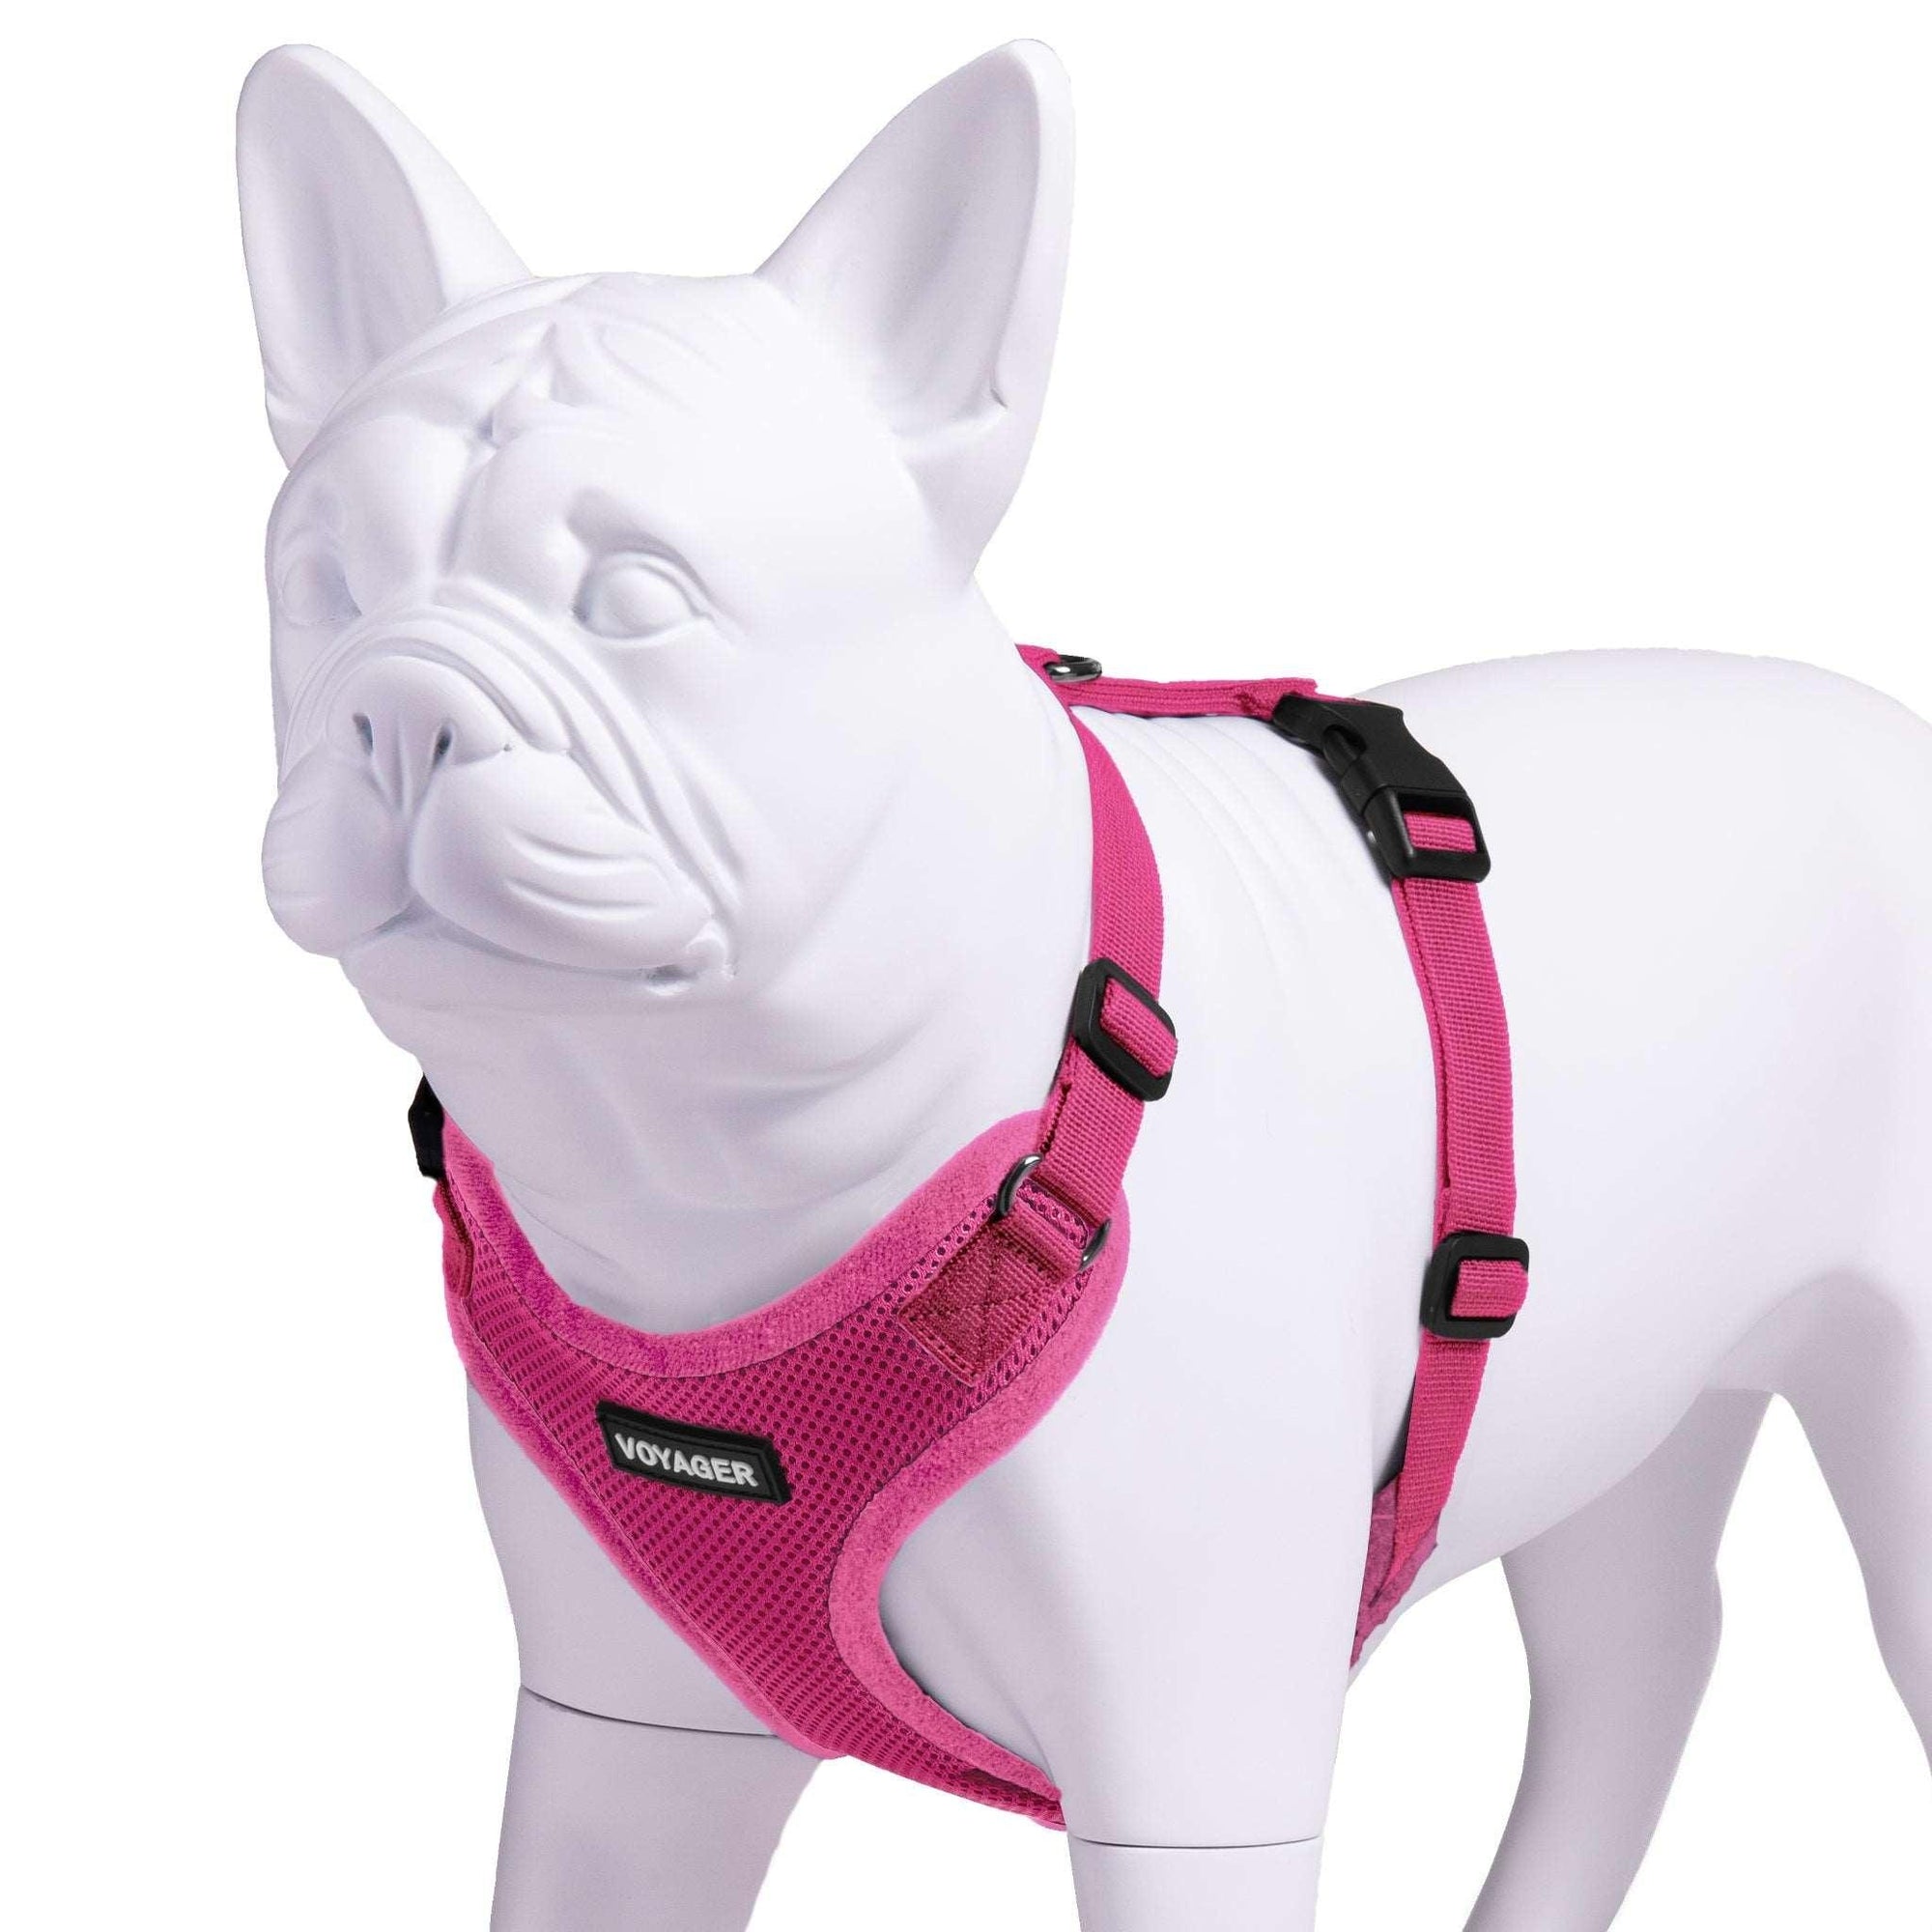 VOYAGER Step-In Lock Dog Harness in Fuchsia with Matching Trim and Webbing - Expanded